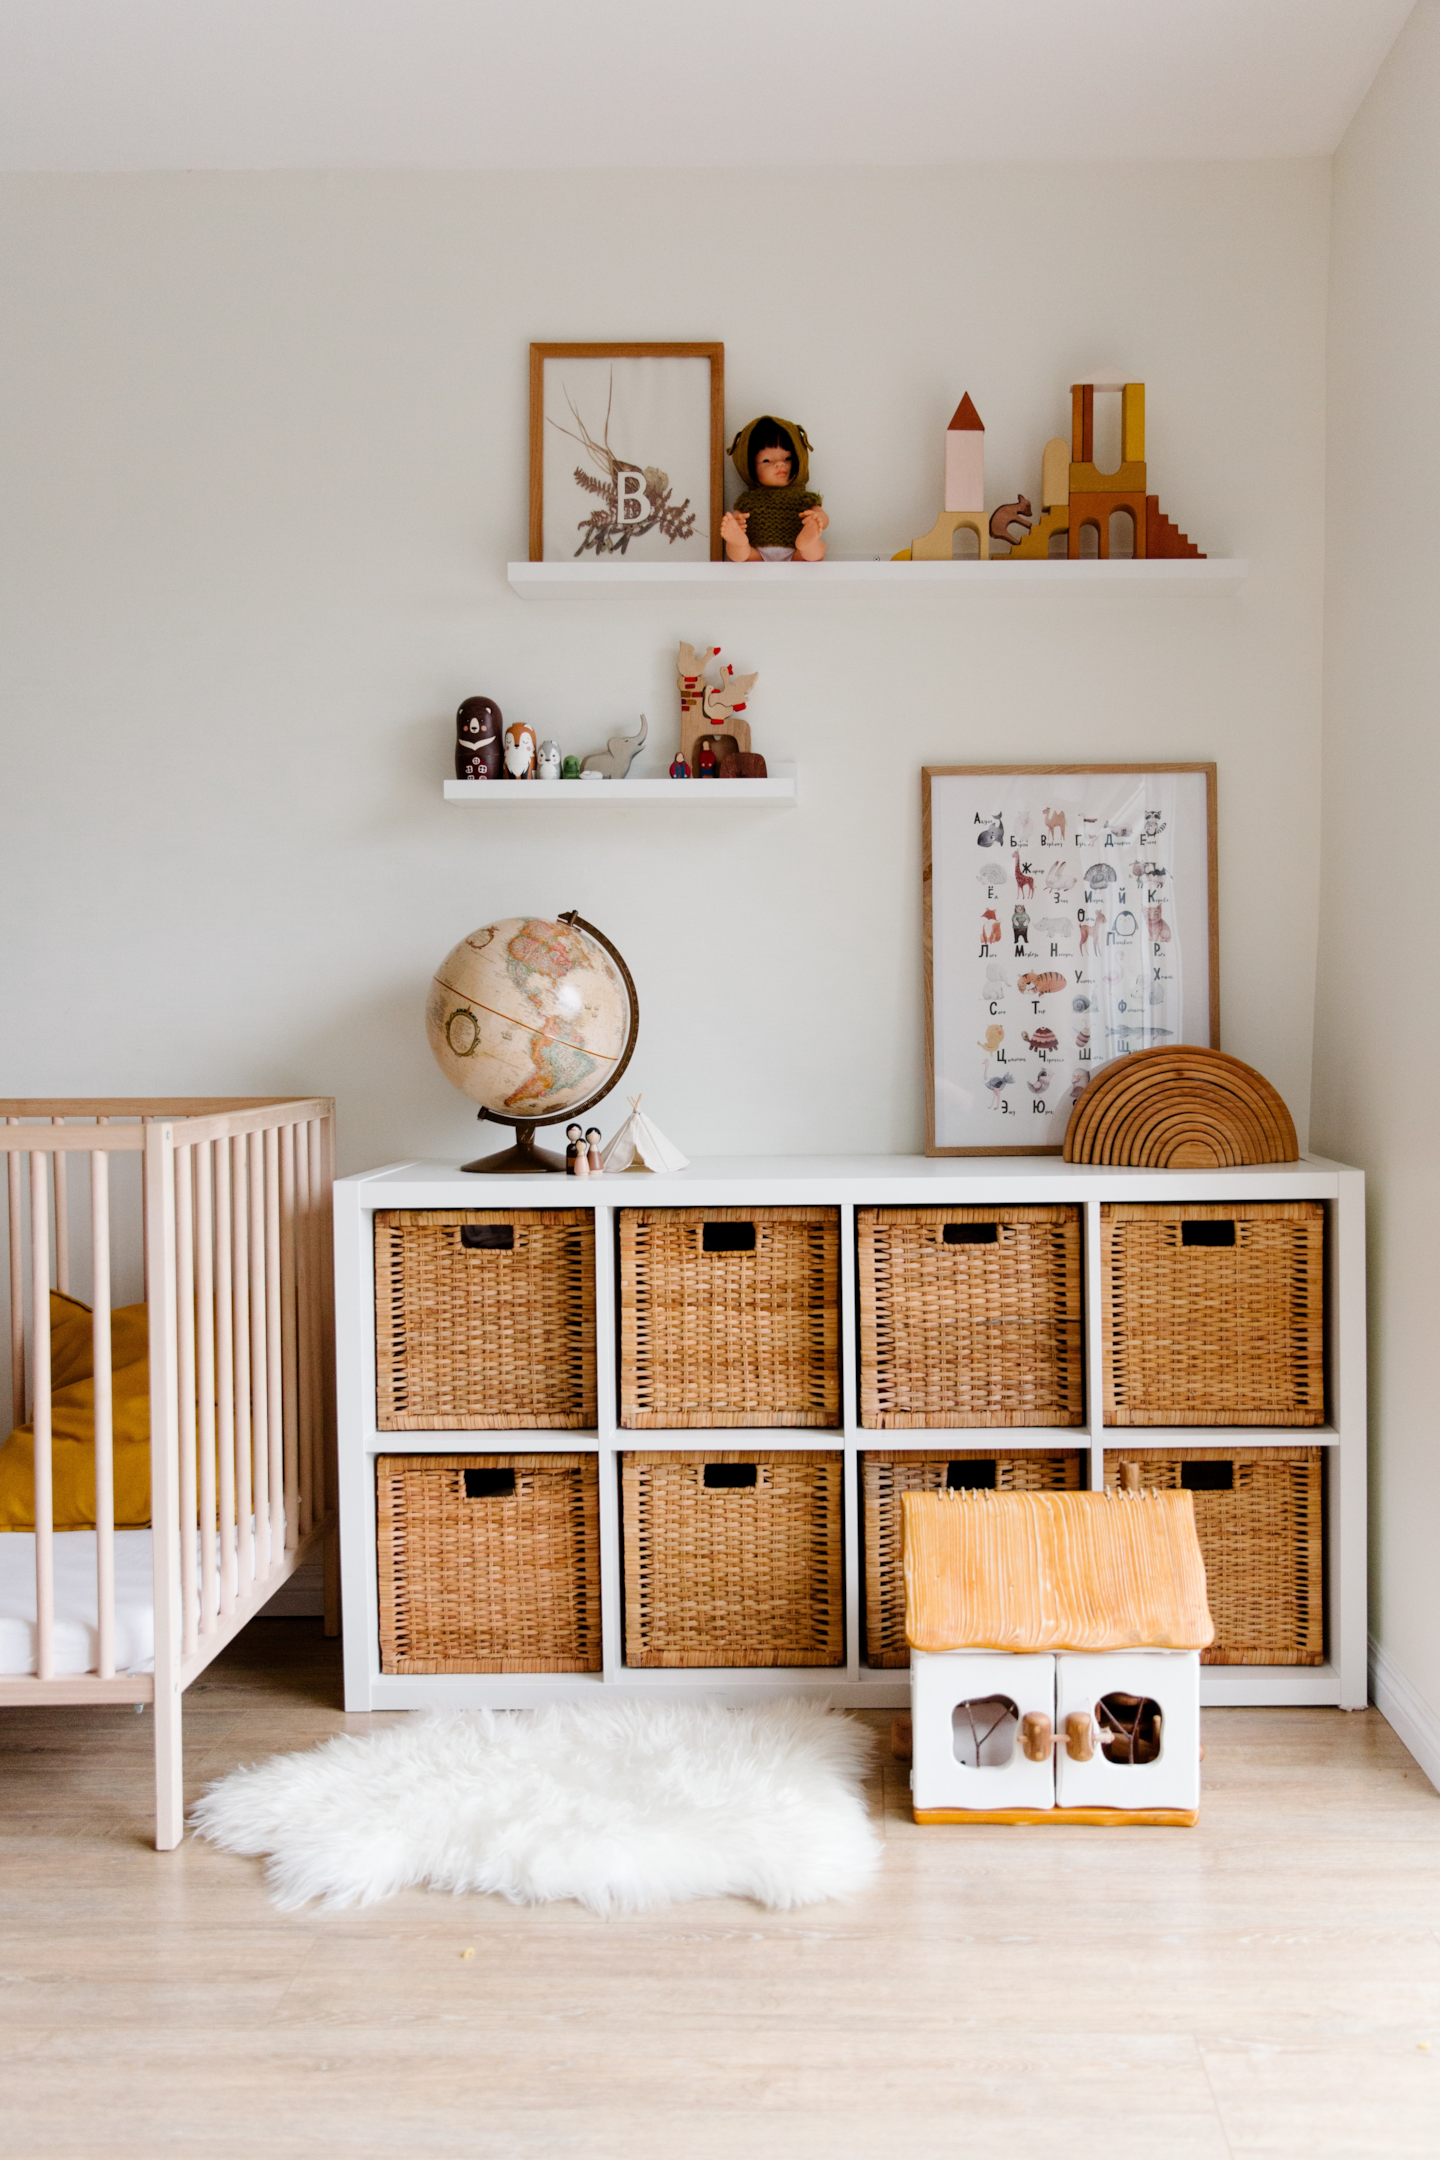 Photo by Tatiana Syrikova: https://www.pexels.com/photo/interior-of-children-bedroom-with-wooden-furniture-and-toys-and-globe-placed-on-shelves-in-room-3932930/